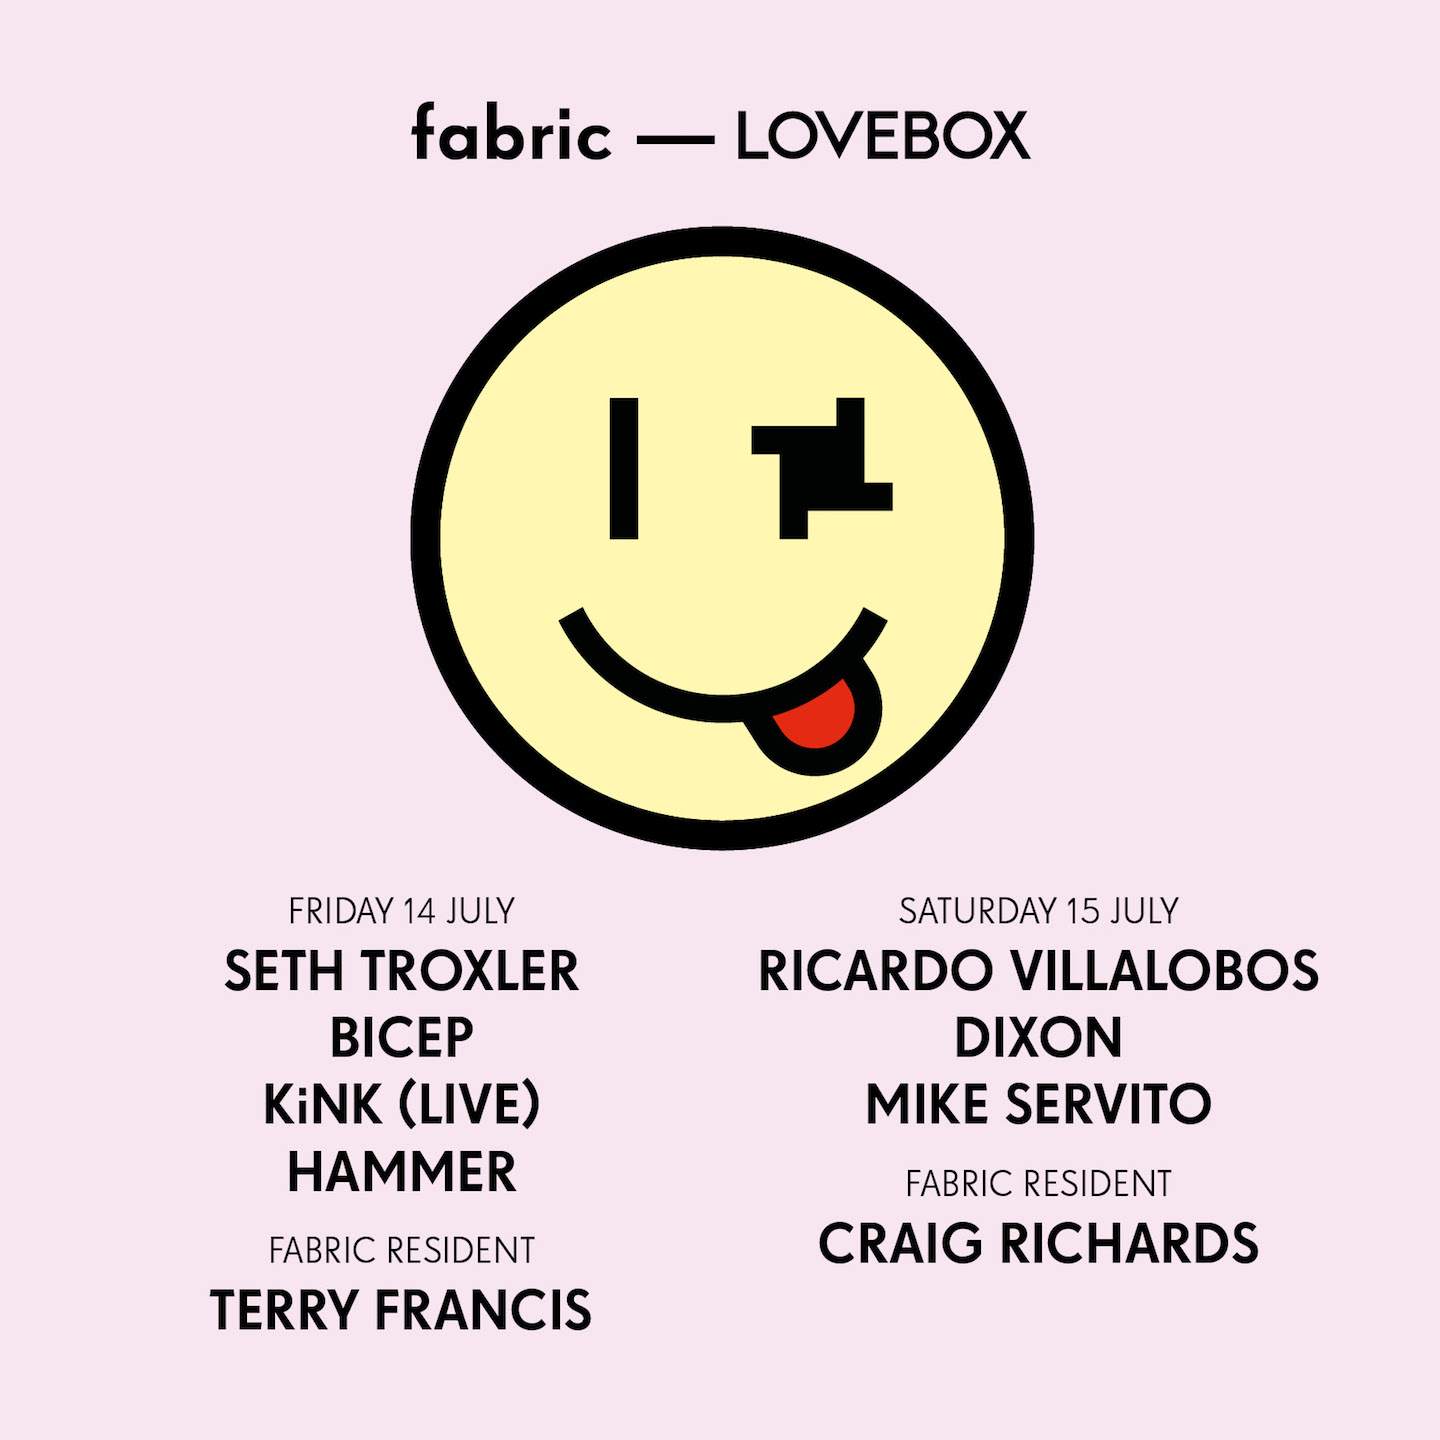 fabric outlines Lovebox 2017 lineup in full image